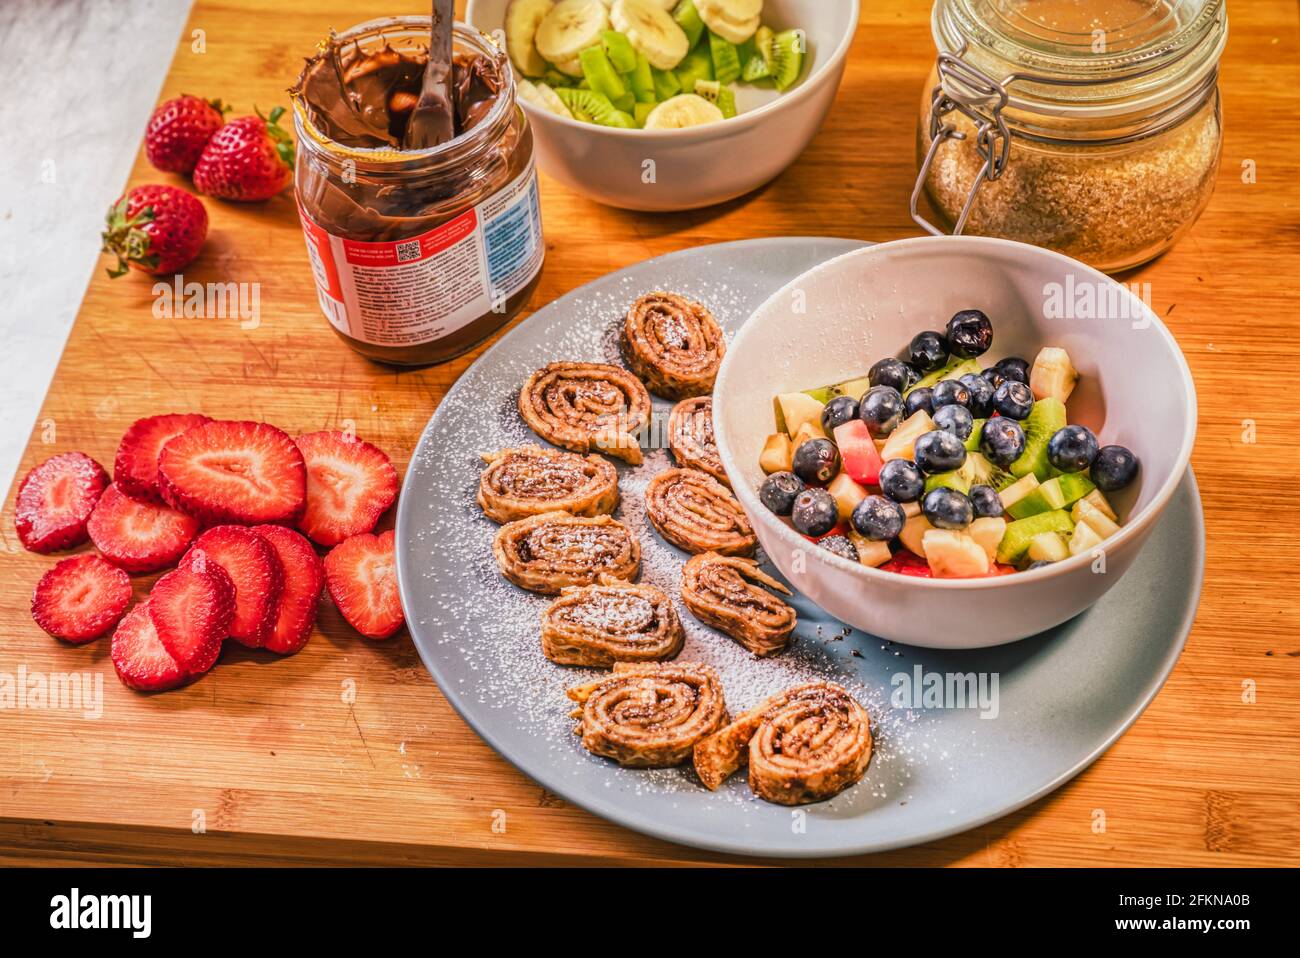 Chocolate hazelnut spread or Nutella cream crepe rolls with fresh fruits like strawberries, kiwi, banana and blueberries on rustic wooden board Stock Photo